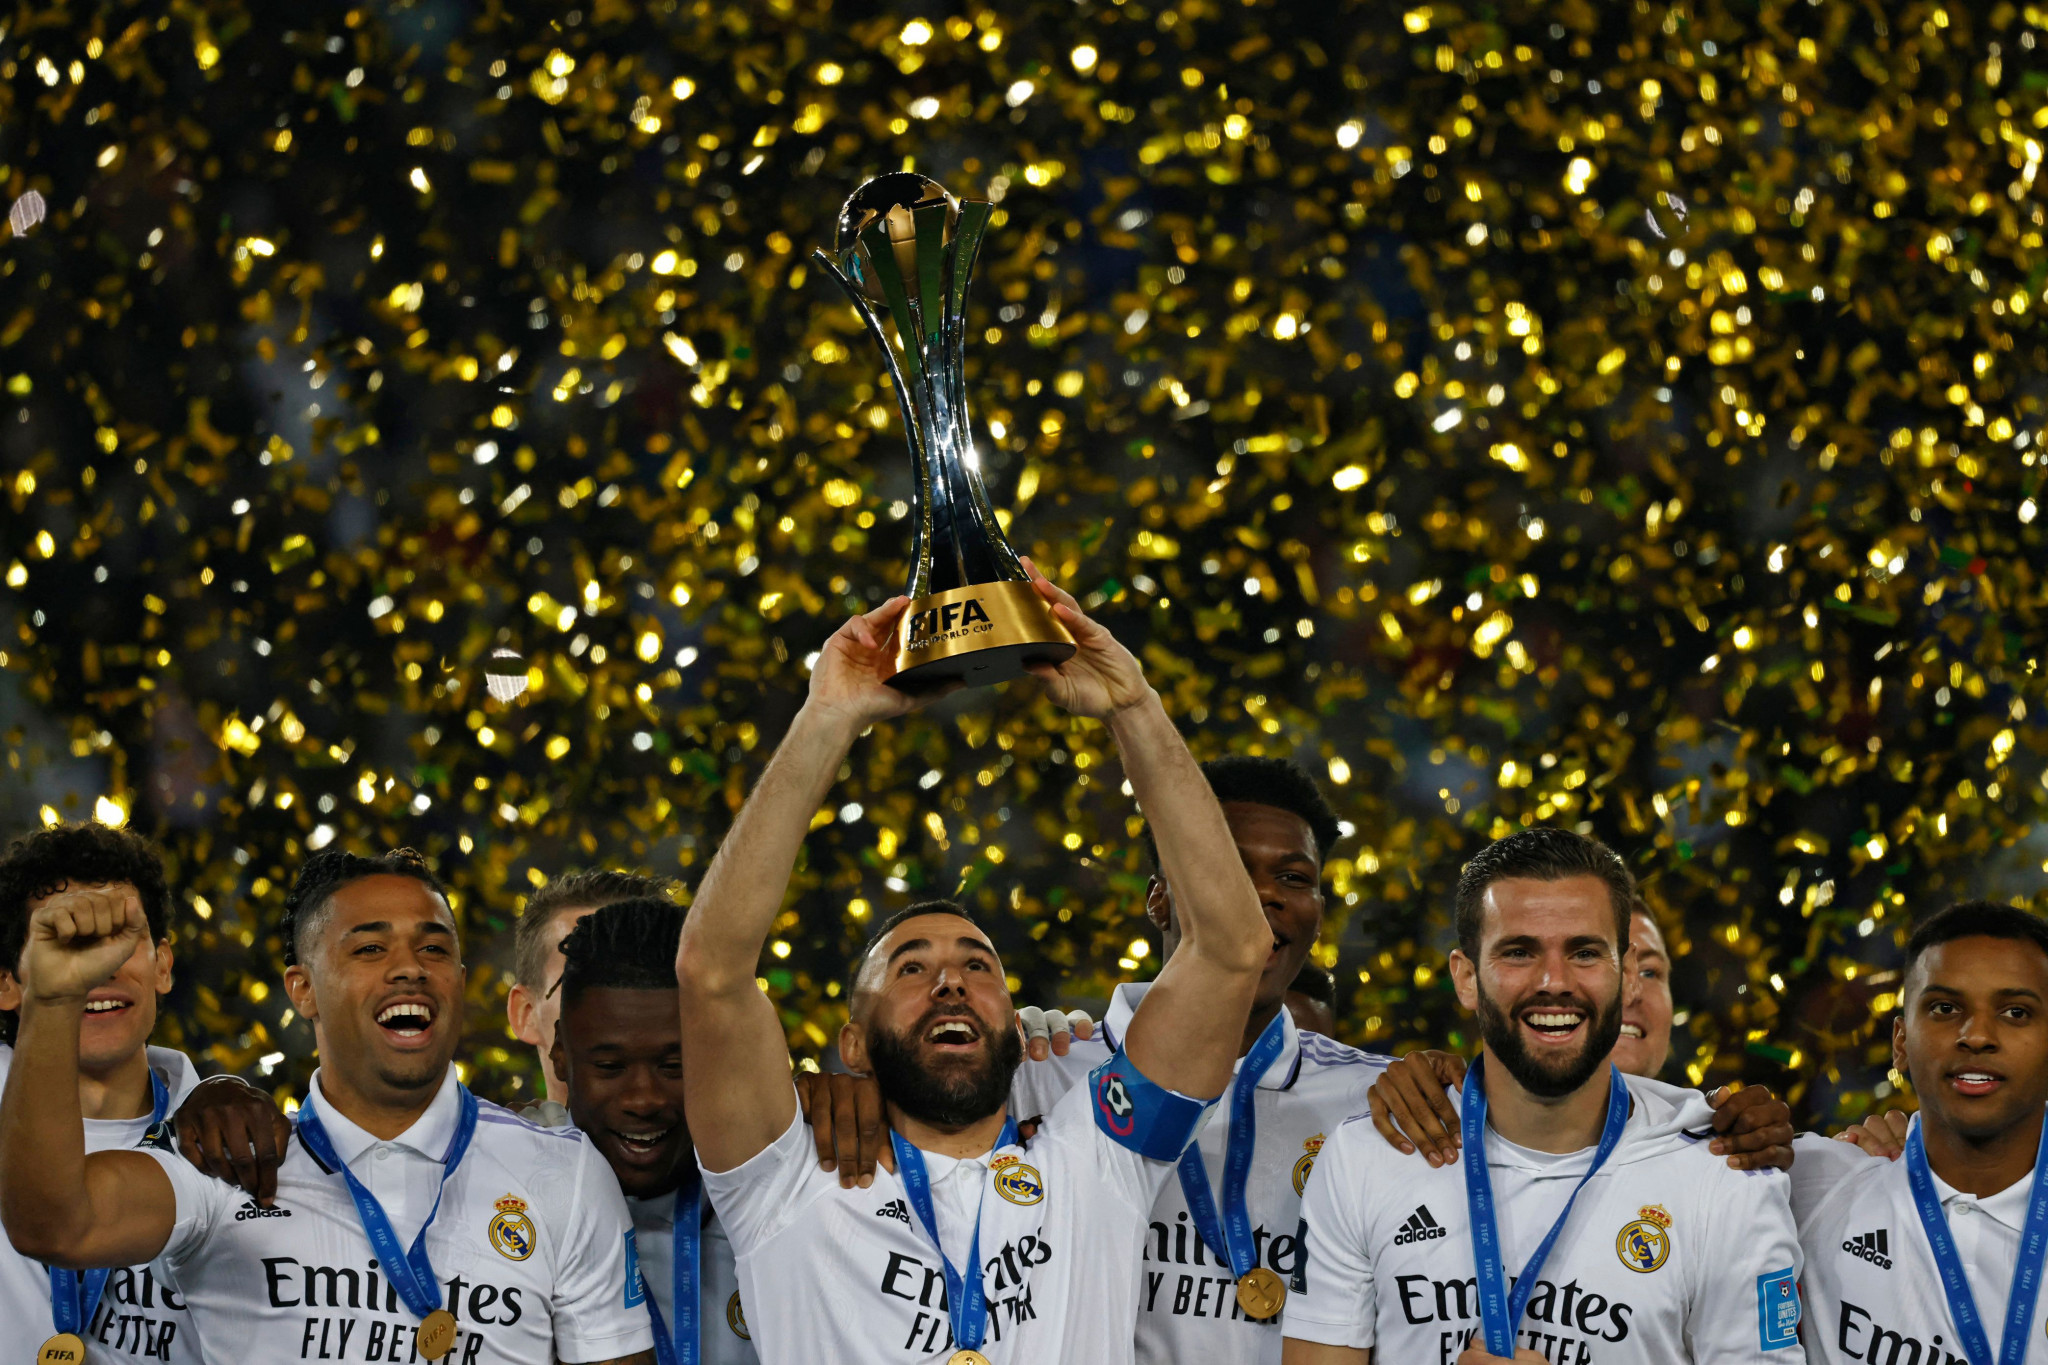 Vinicius and Valverde star as Real Madrid win record-extending FIFA Club World Cup